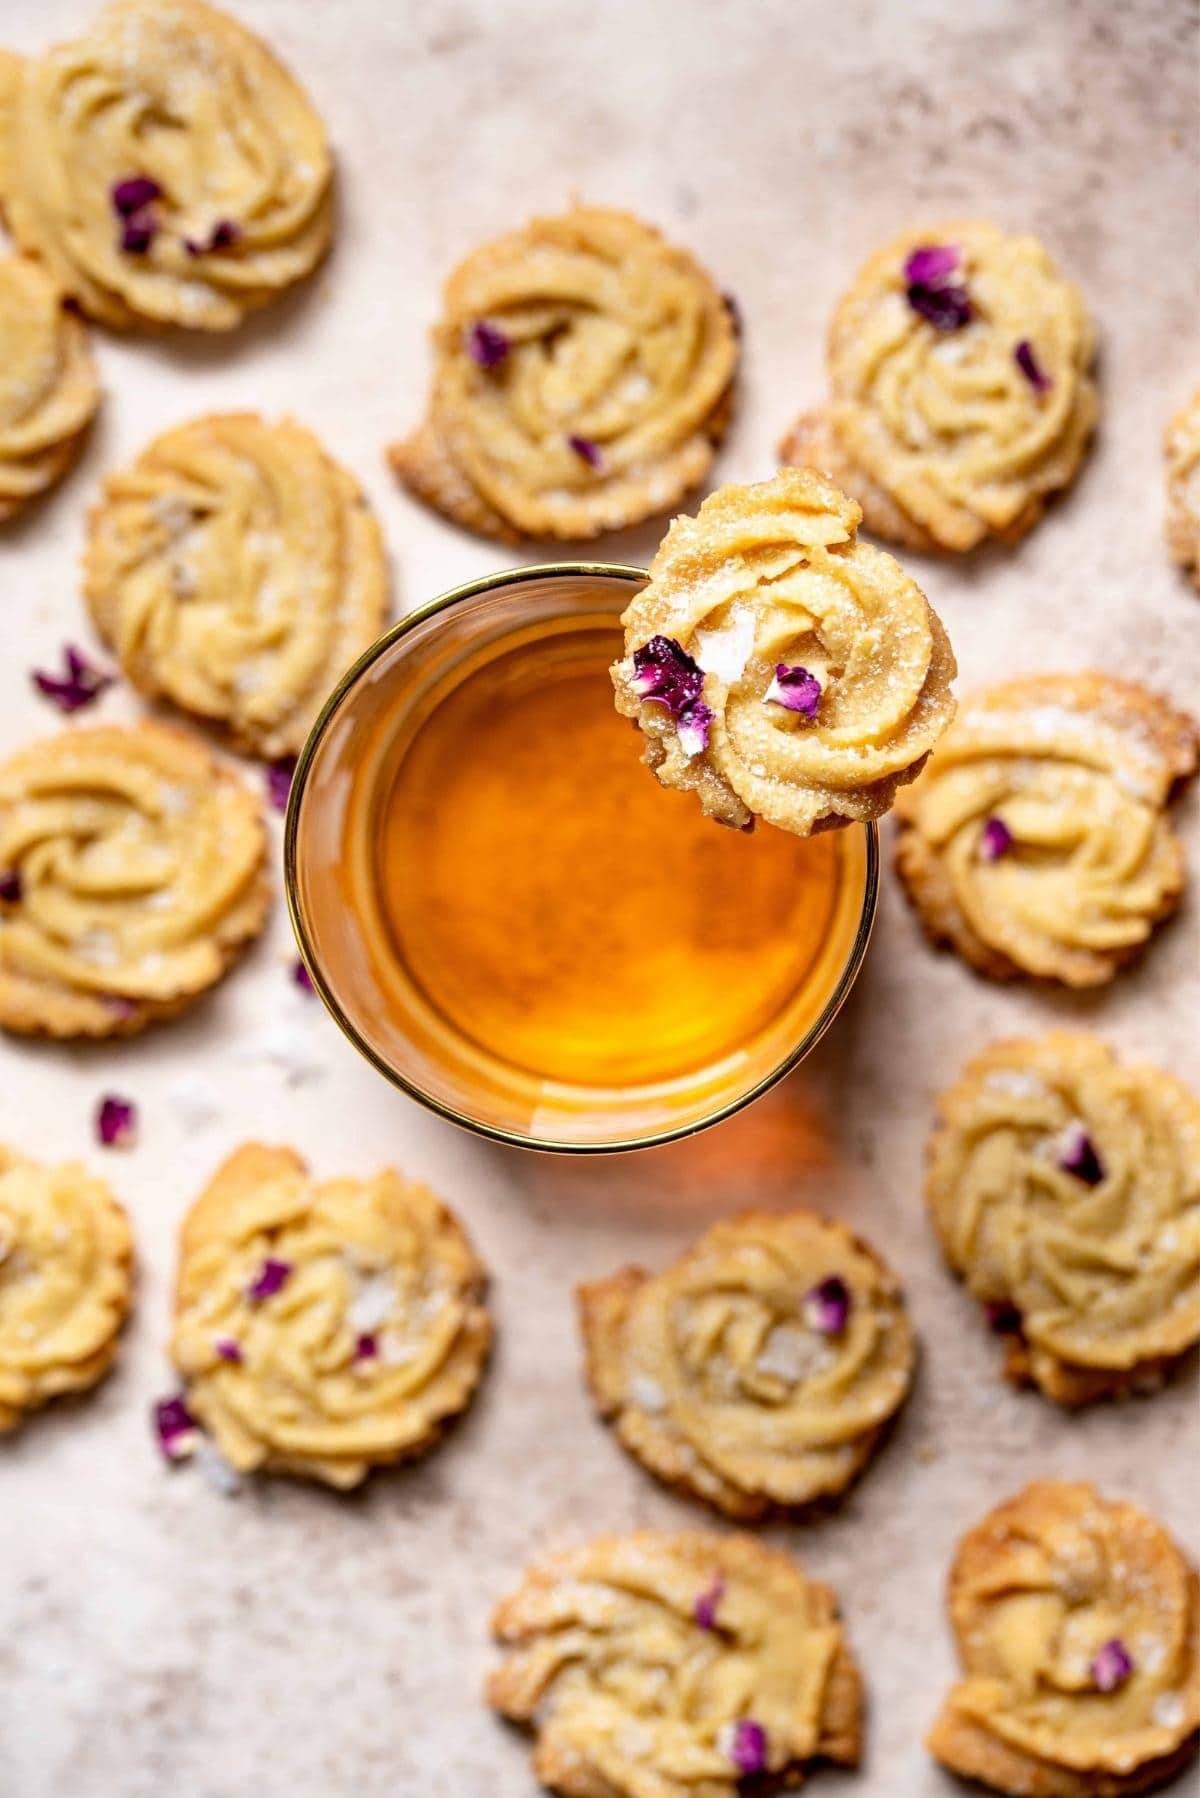 Shortbread cookies lined up around a glass of bourbon